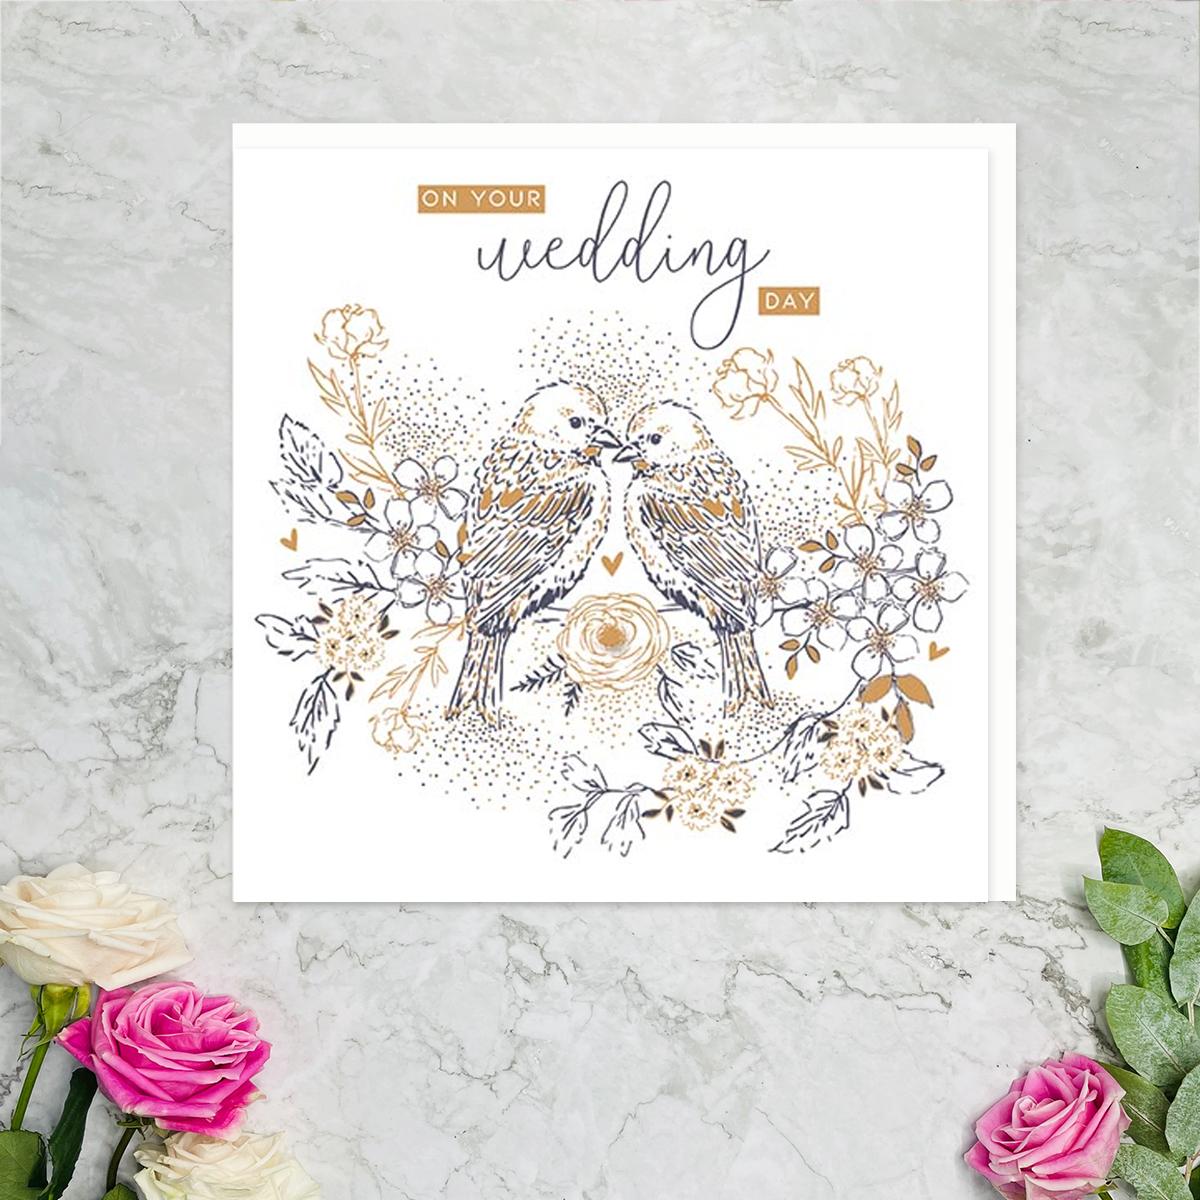 On Your Wedding Day Lovebirds Card Front Image